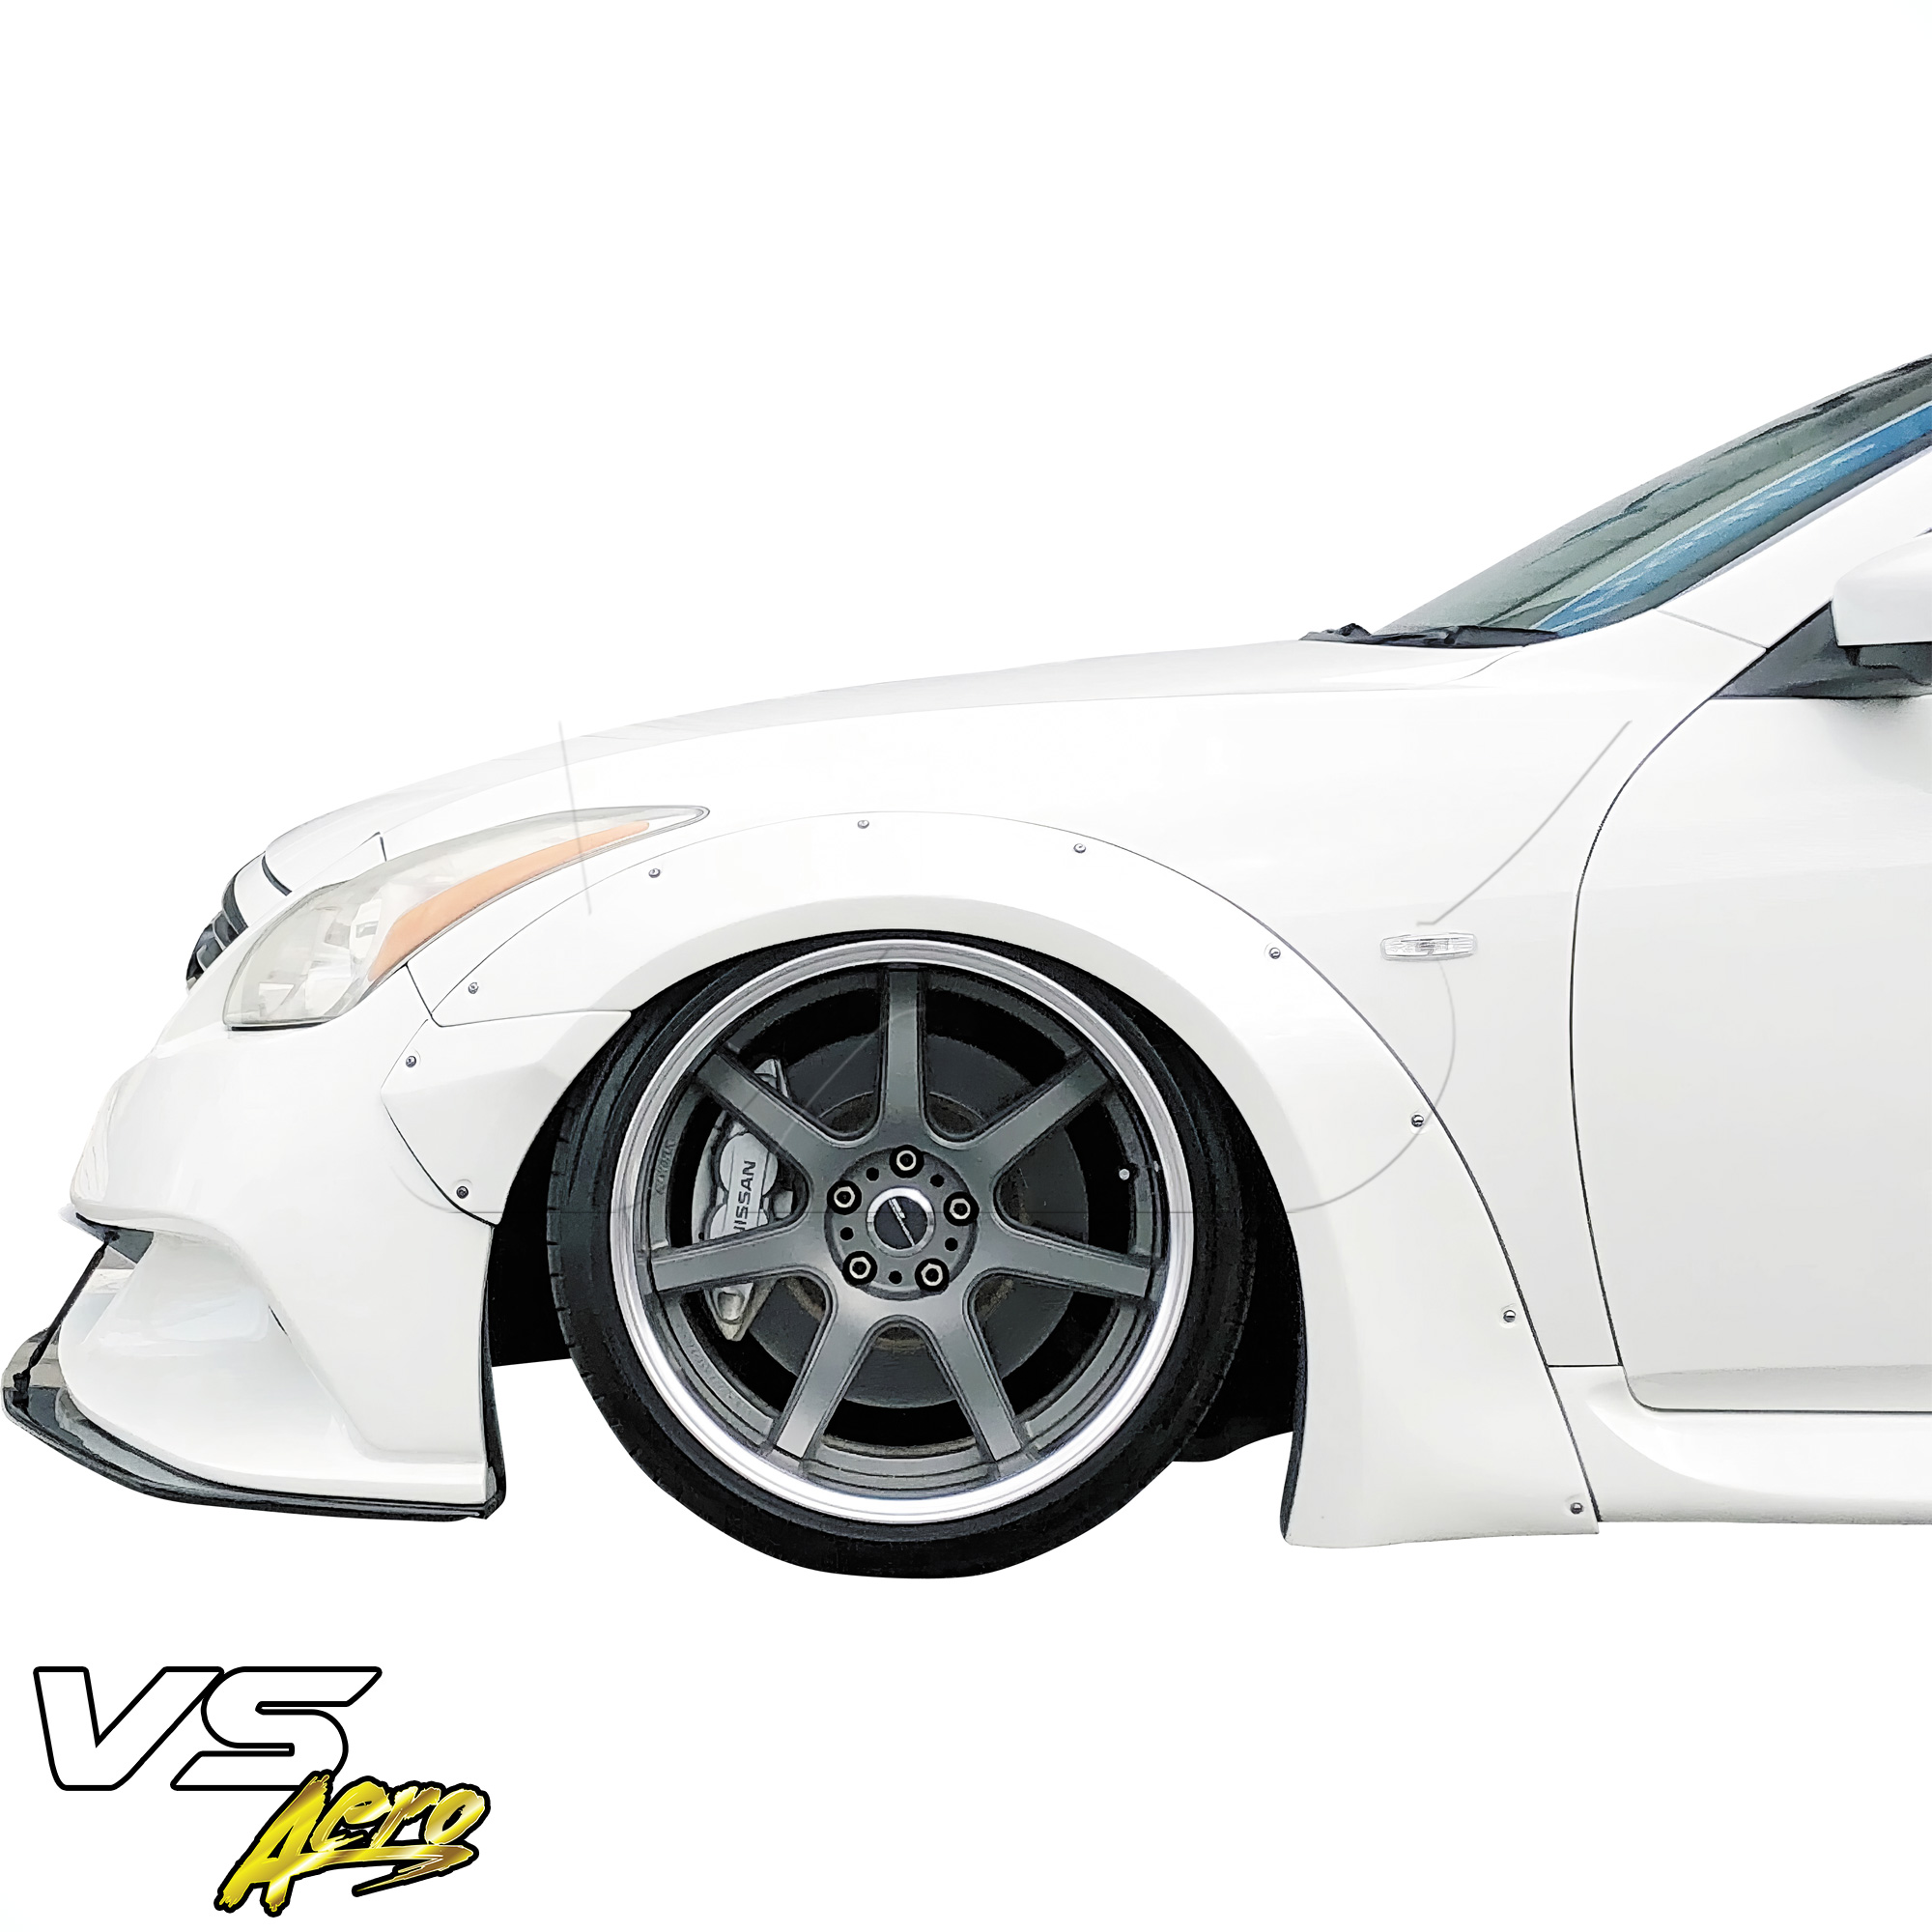 VSaero FRP LBPE Wide Body Fender Flares (front) 4pc > Infiniti G37 Coupe 2008-2015 > 2dr Coupe - Image 27